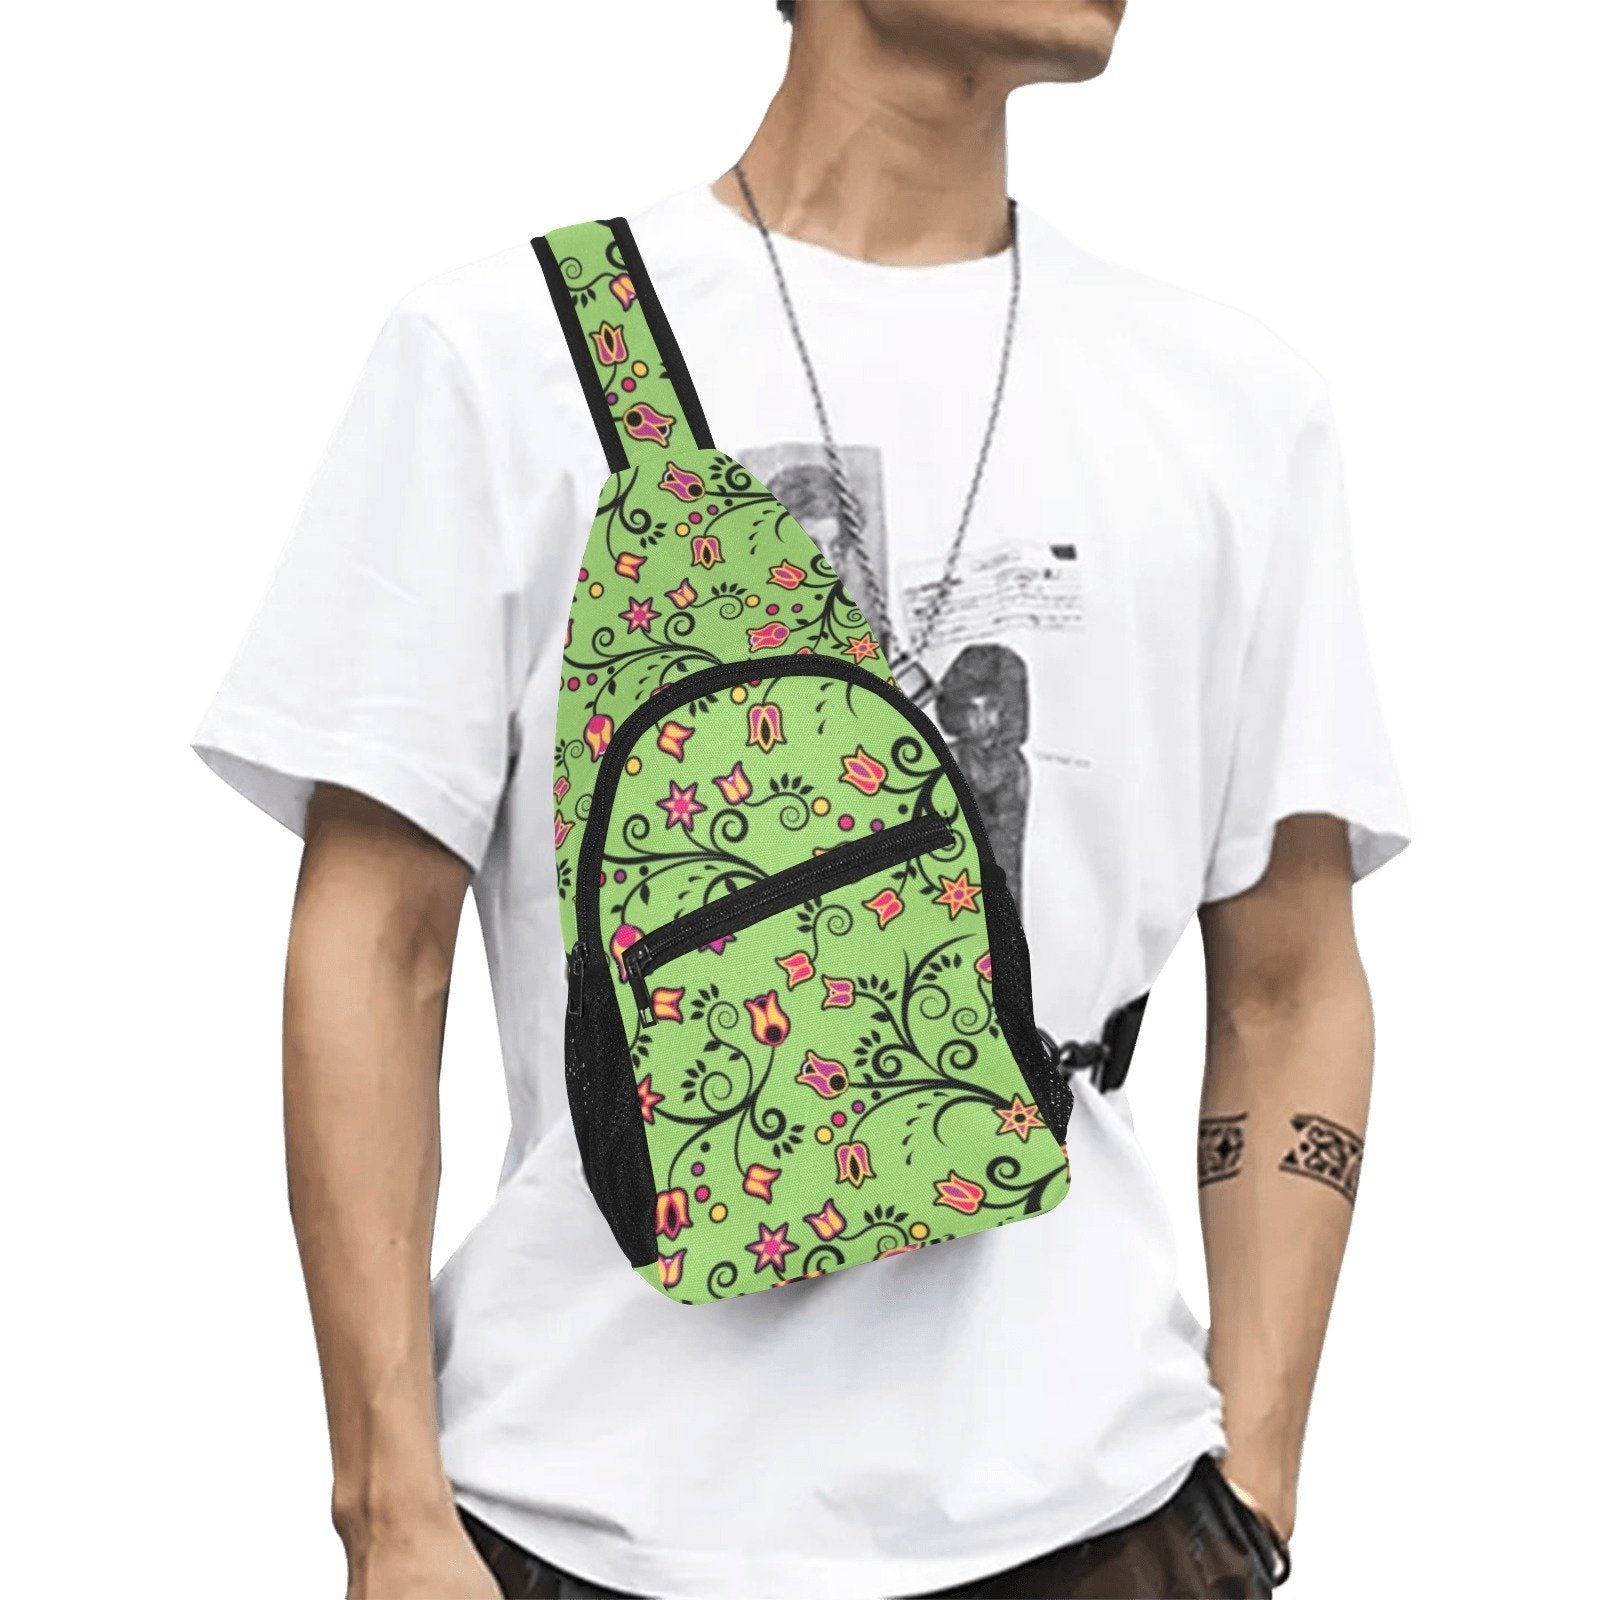 LightGreen Yellow Star All Over Print Chest Bag (Model 1719) All Over Print Chest Bag (1719) e-joyer 